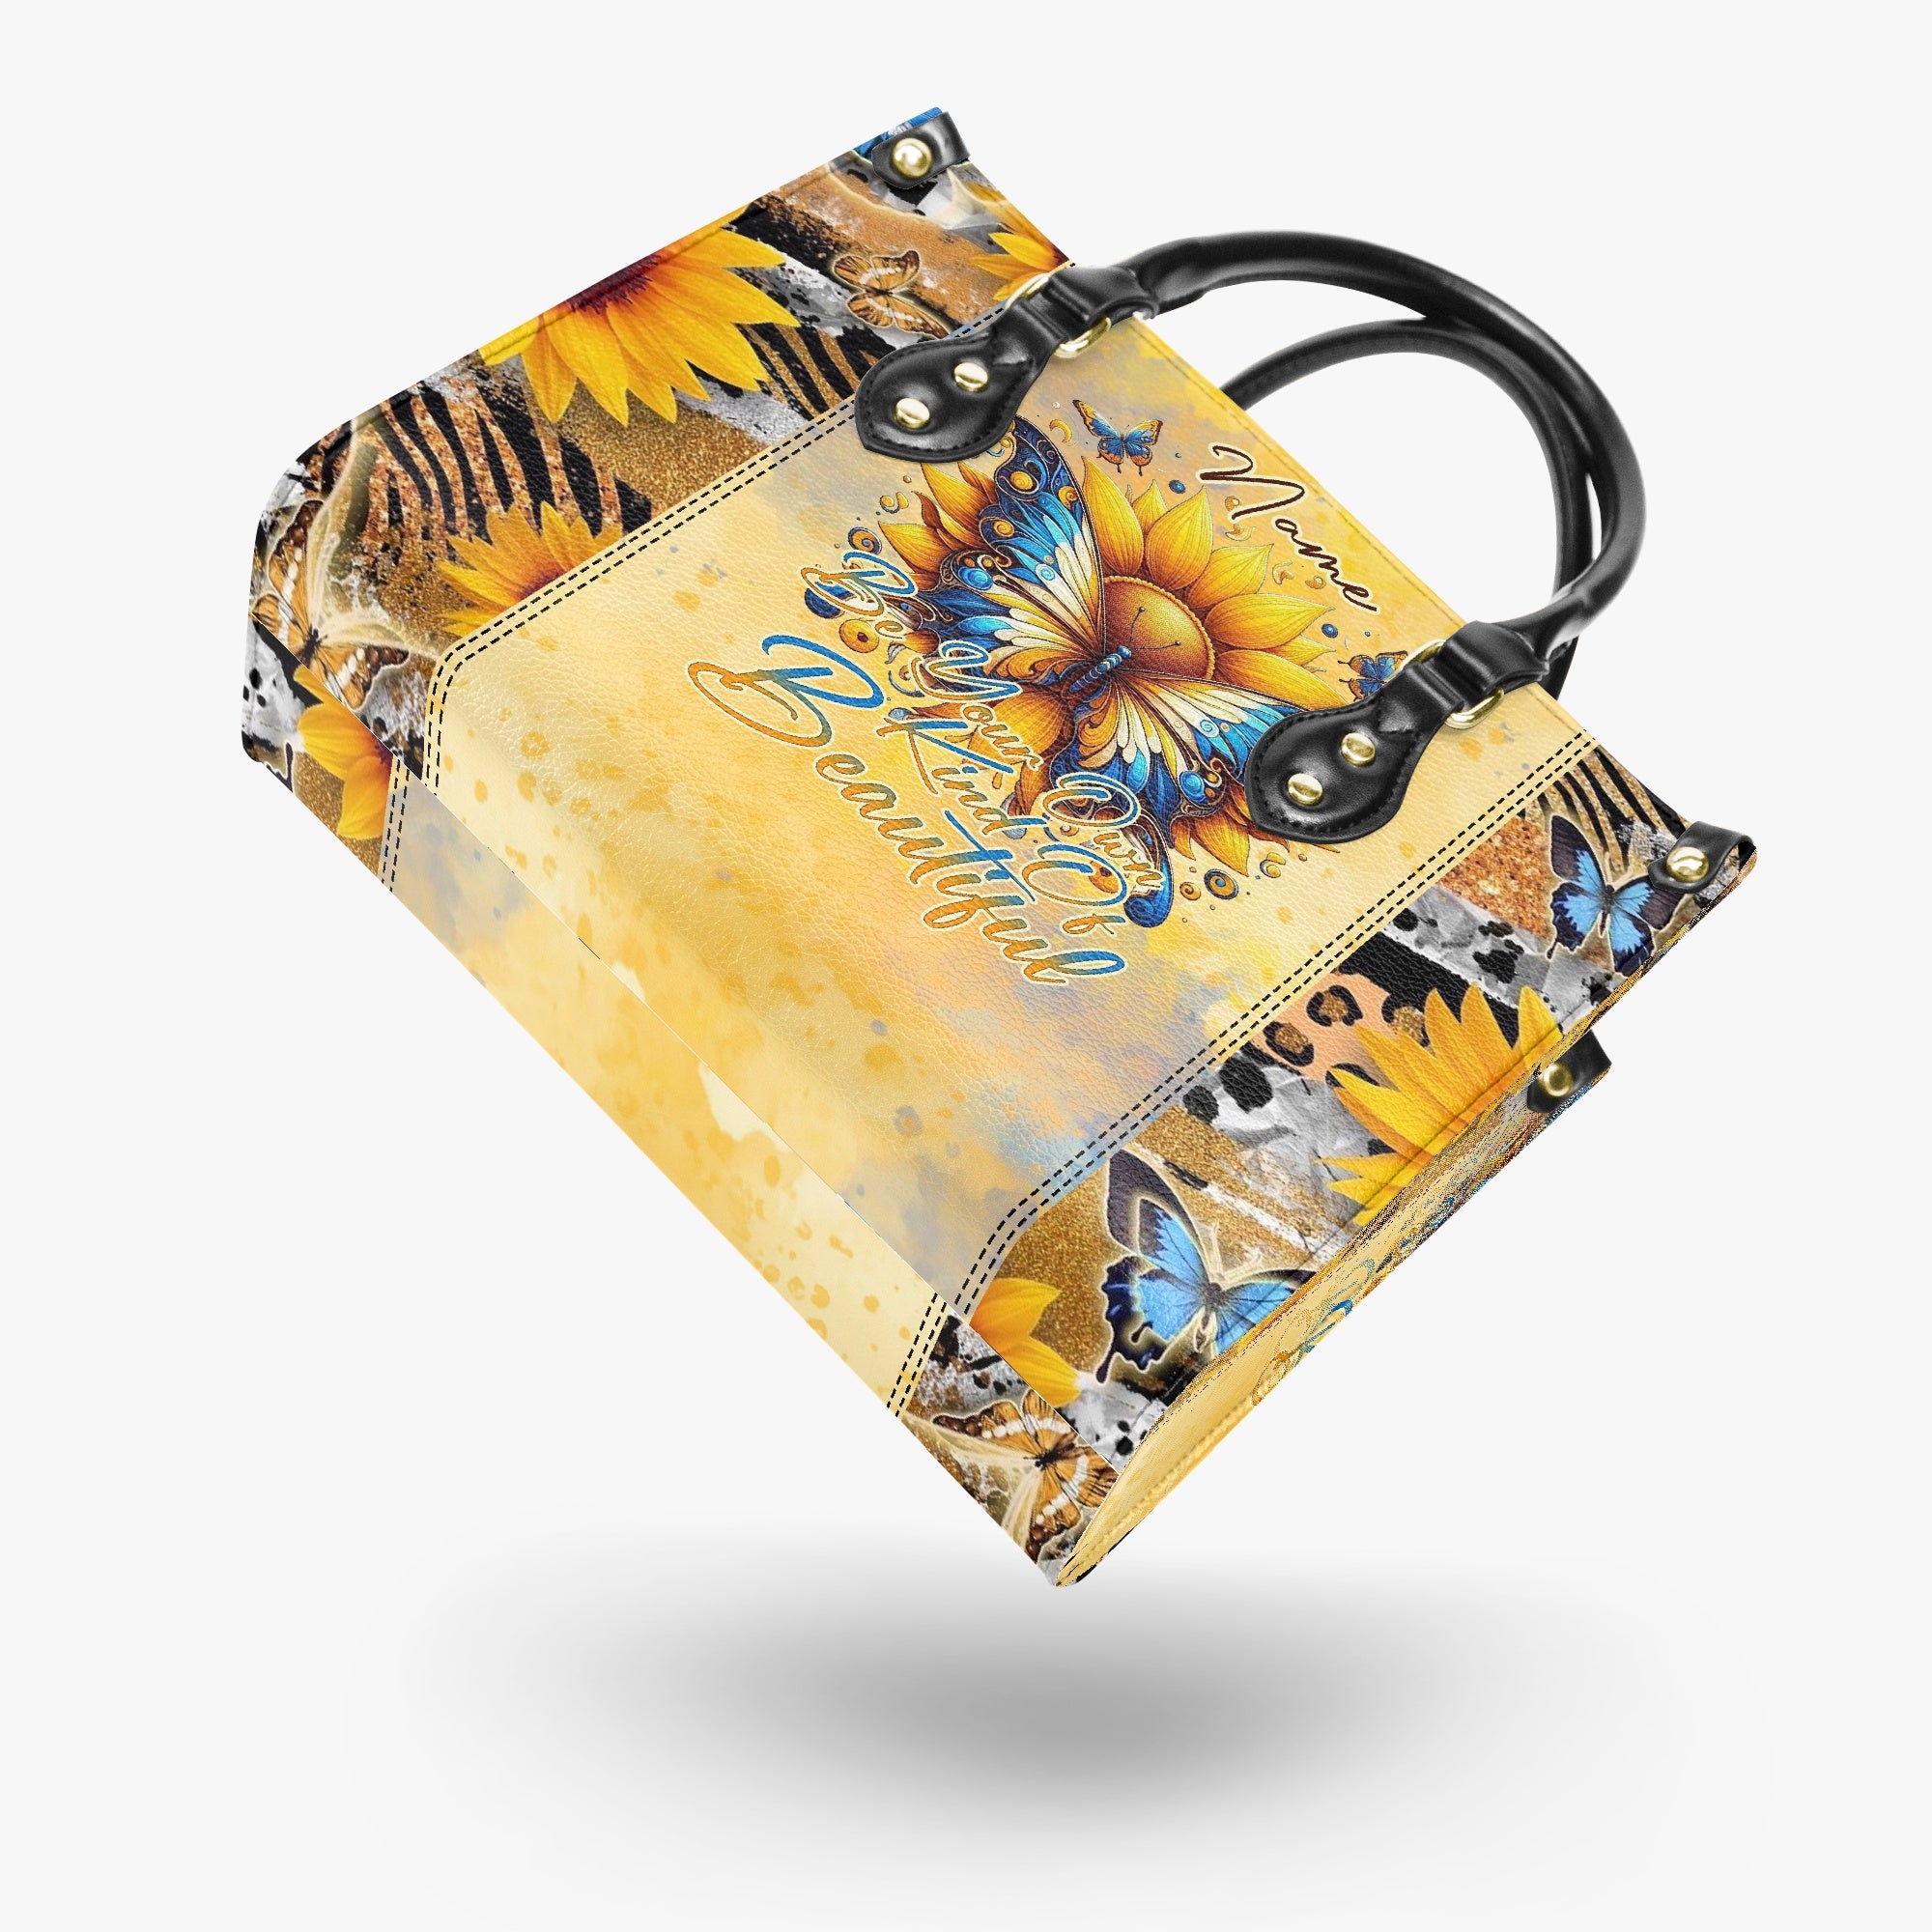 BE YOUR OWN KIND OF BEAUTIFUL BUTTERFLY SUNFLOWER LEATHER HANDBAG - TLNZ2603241